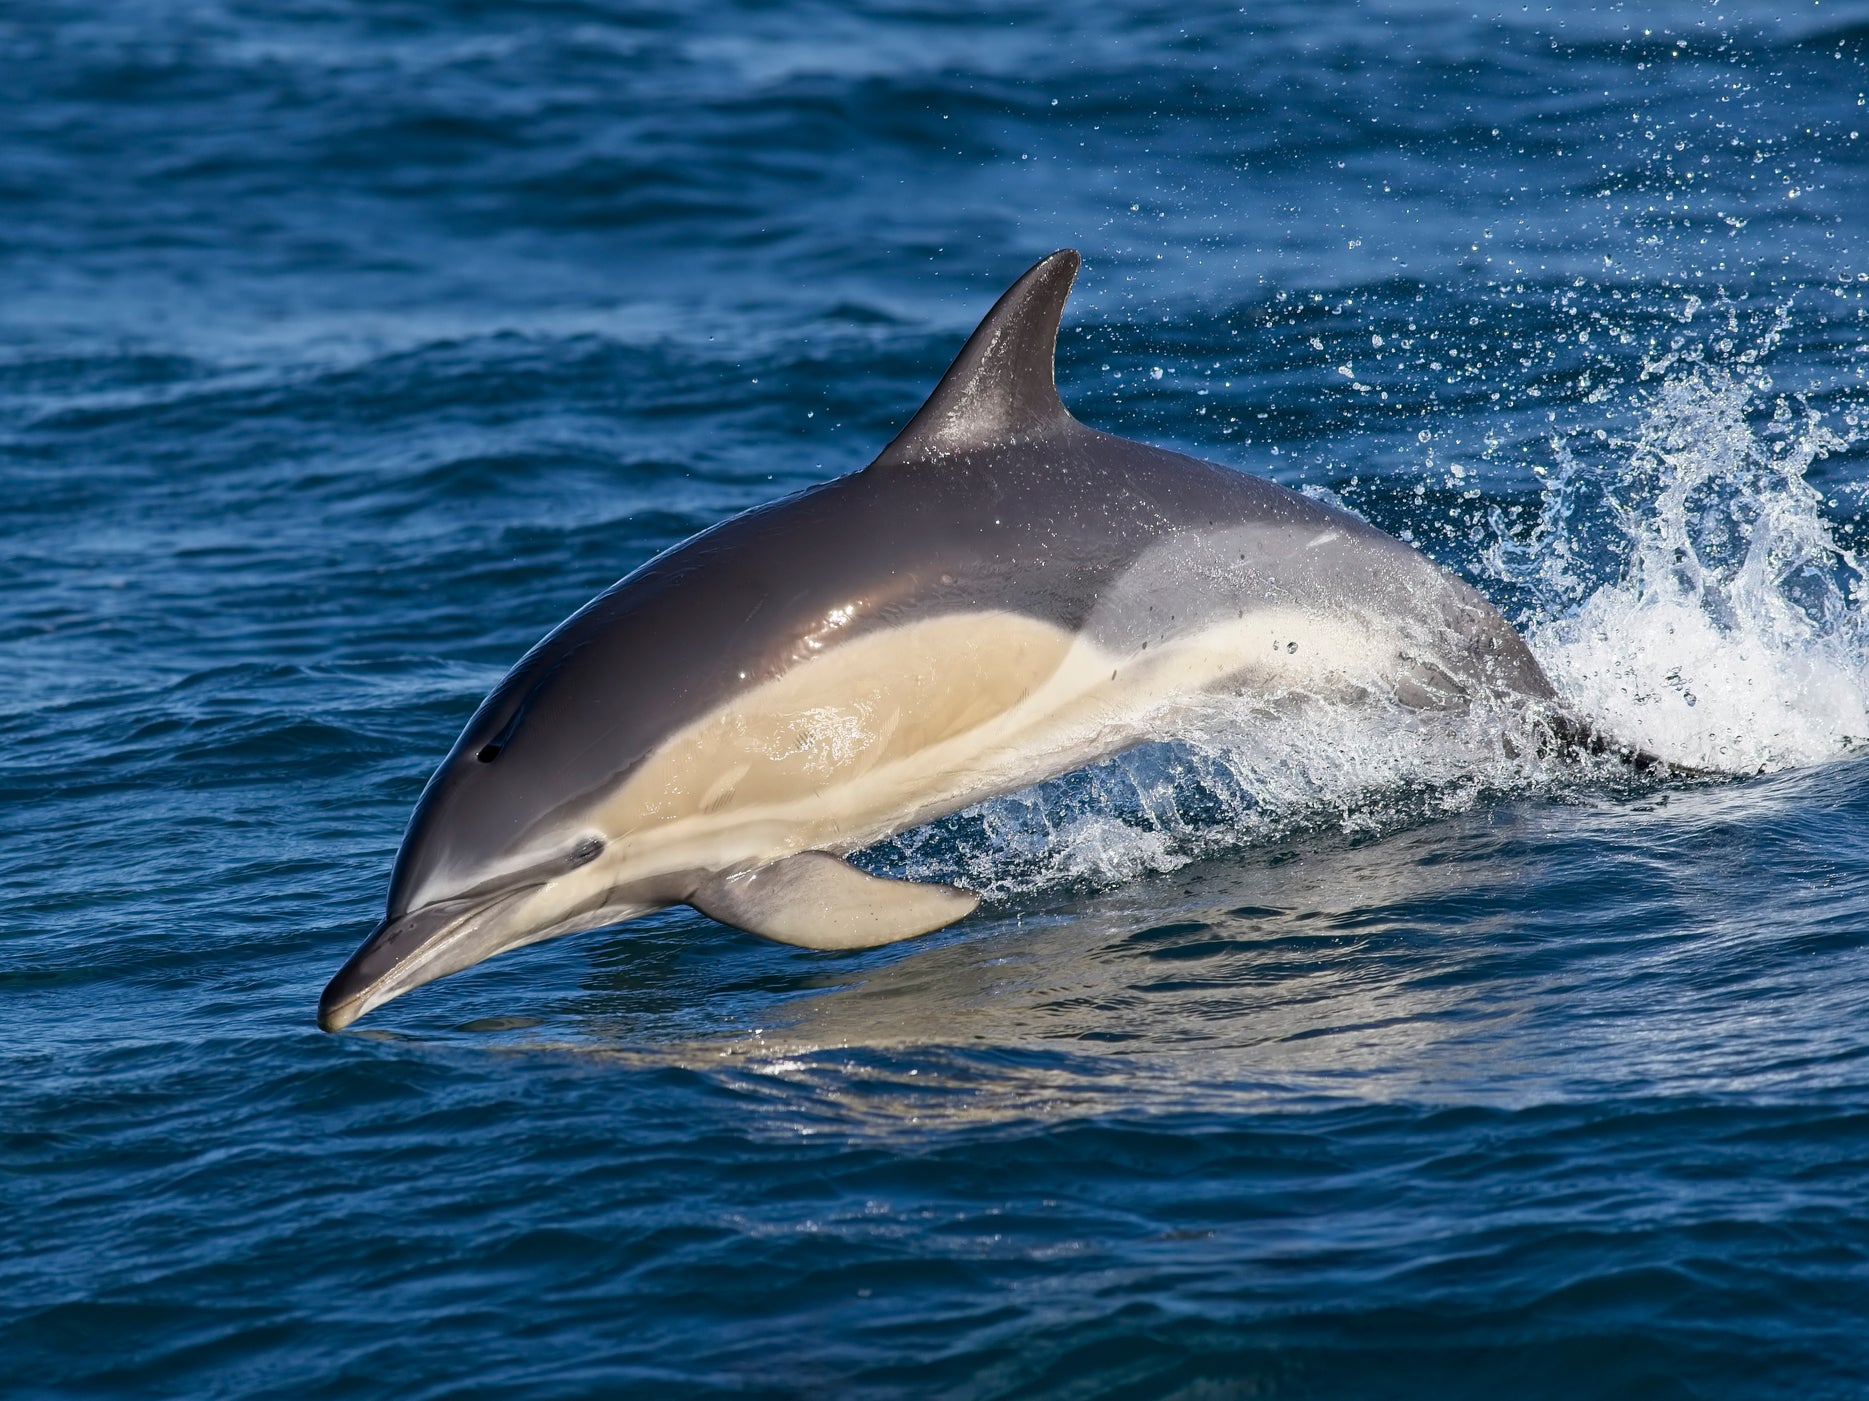 The world’s most abundant cetacean, the common dolphin, has spread as far north as the Outer Hebrides off Scotland’s north-west coast, researchers say